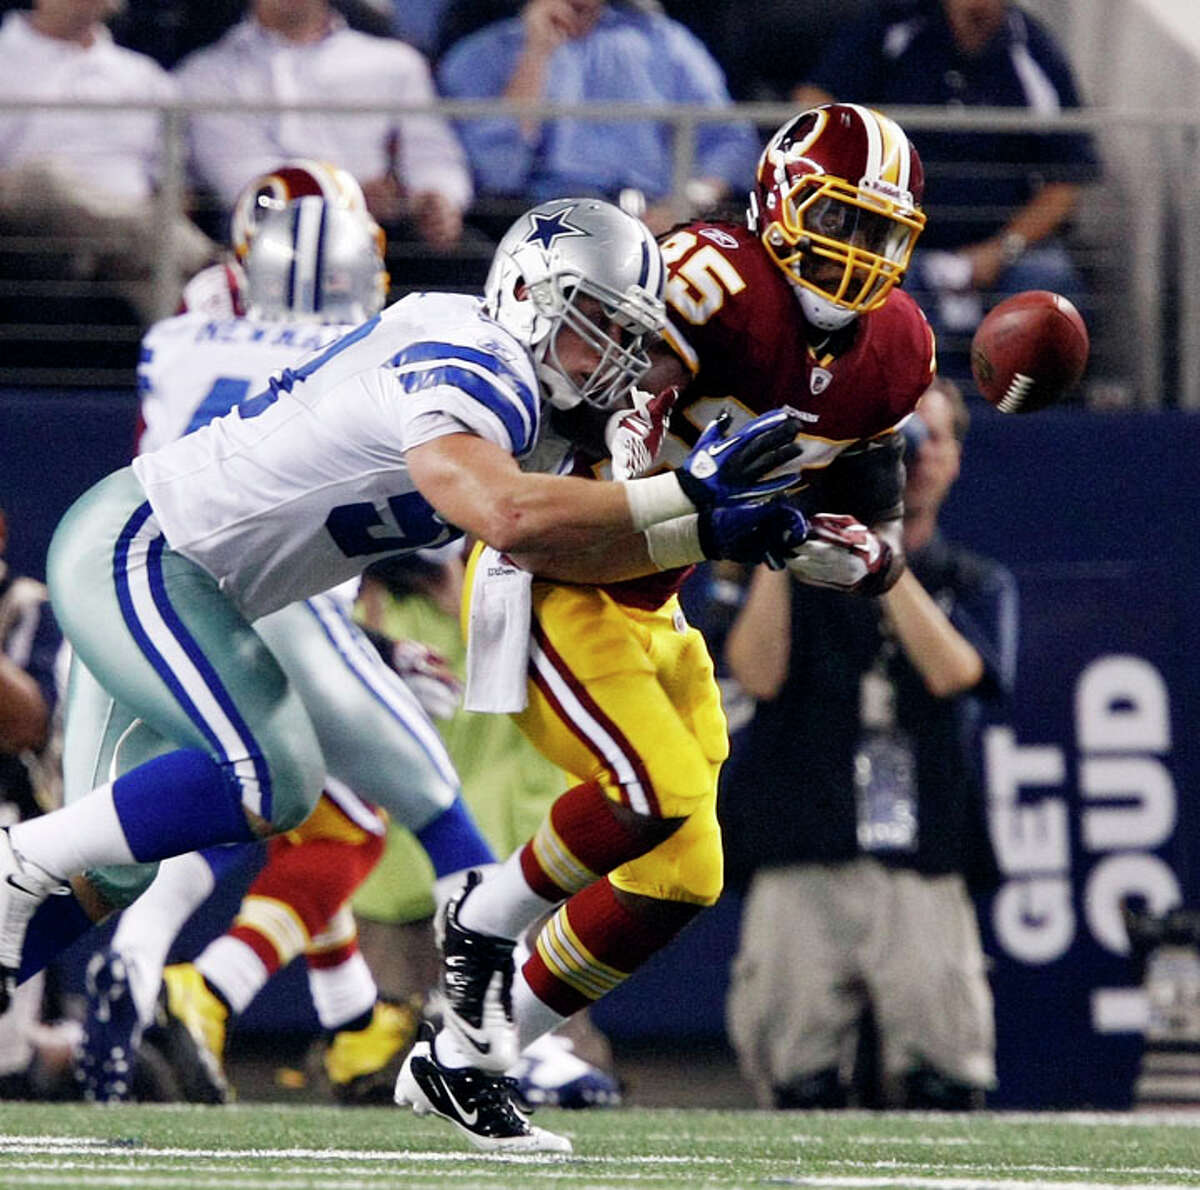 Dallas Cowboys inside linebacker Sean Lee (50) deflects a pass intended for Washington Redskins running back Tim Hightower (25) during the first half of an NFL football game Monday, Sept. 26, 2011, in Arlington.